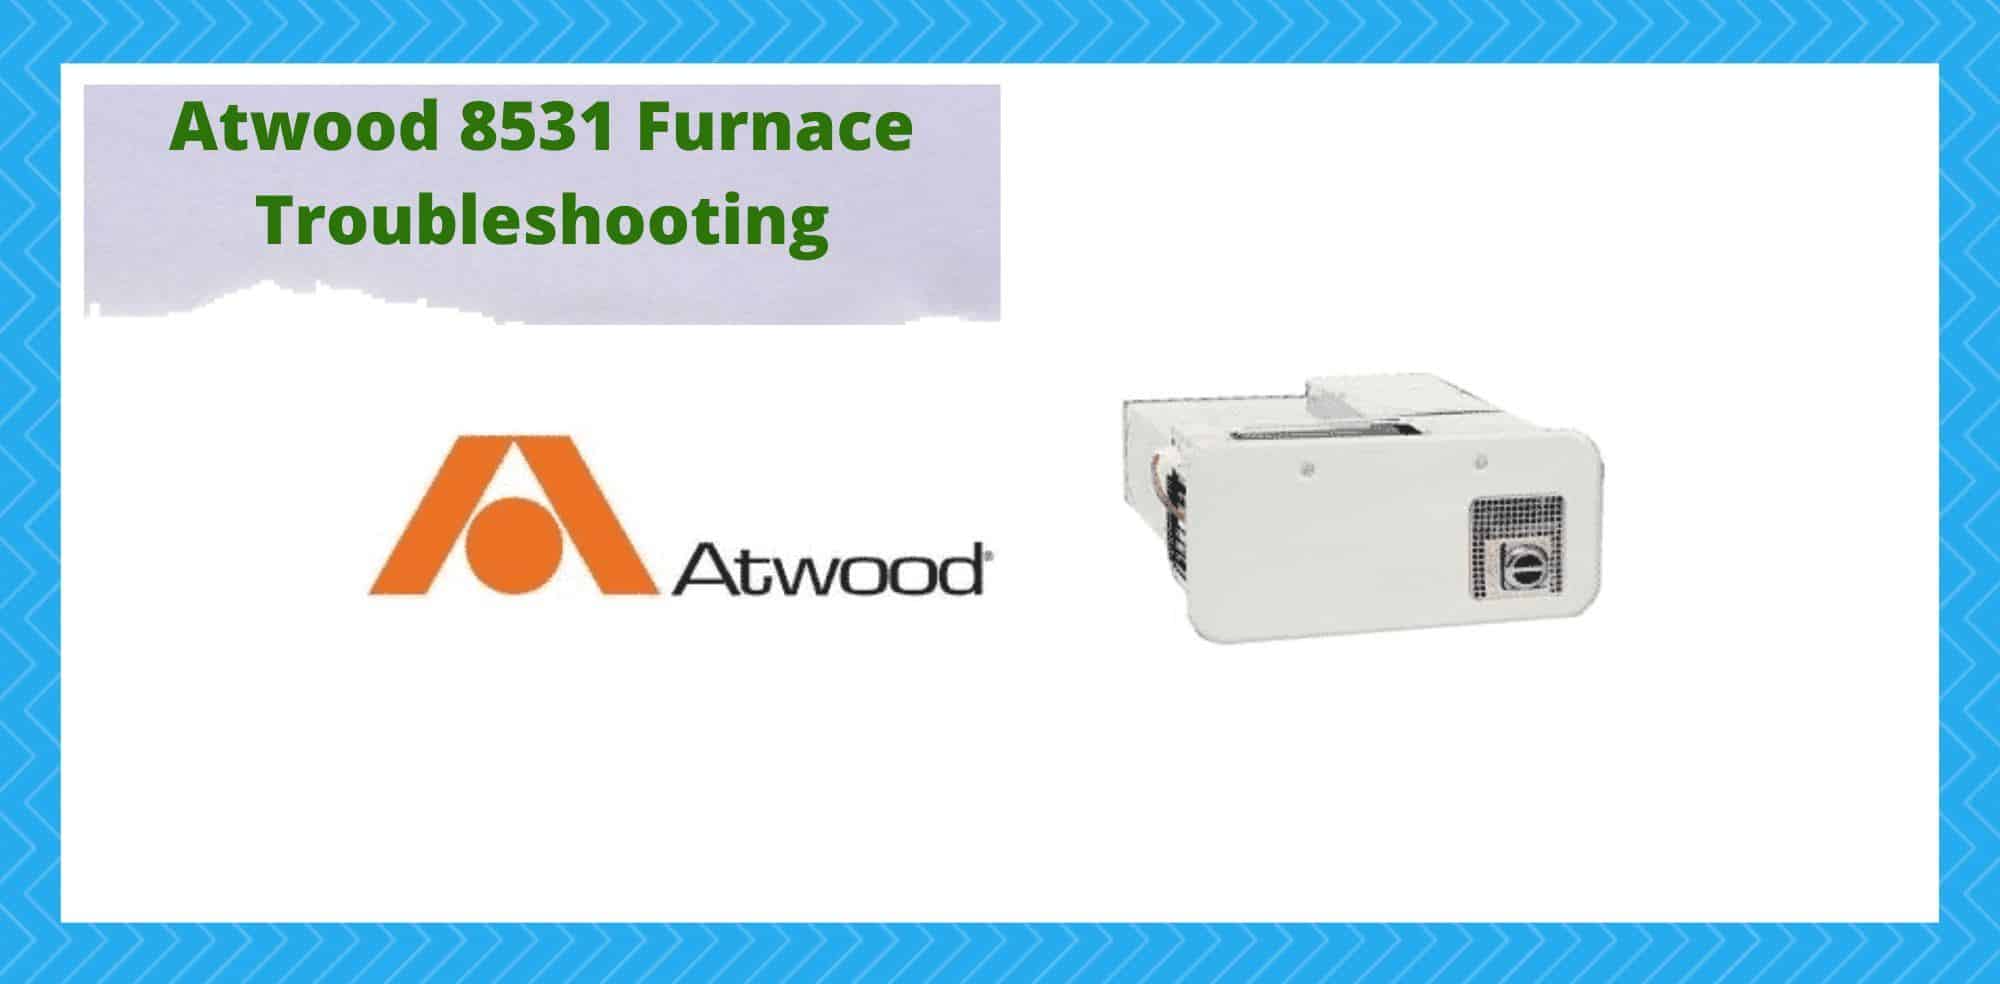 atwood 8531 furnace troubleshooting